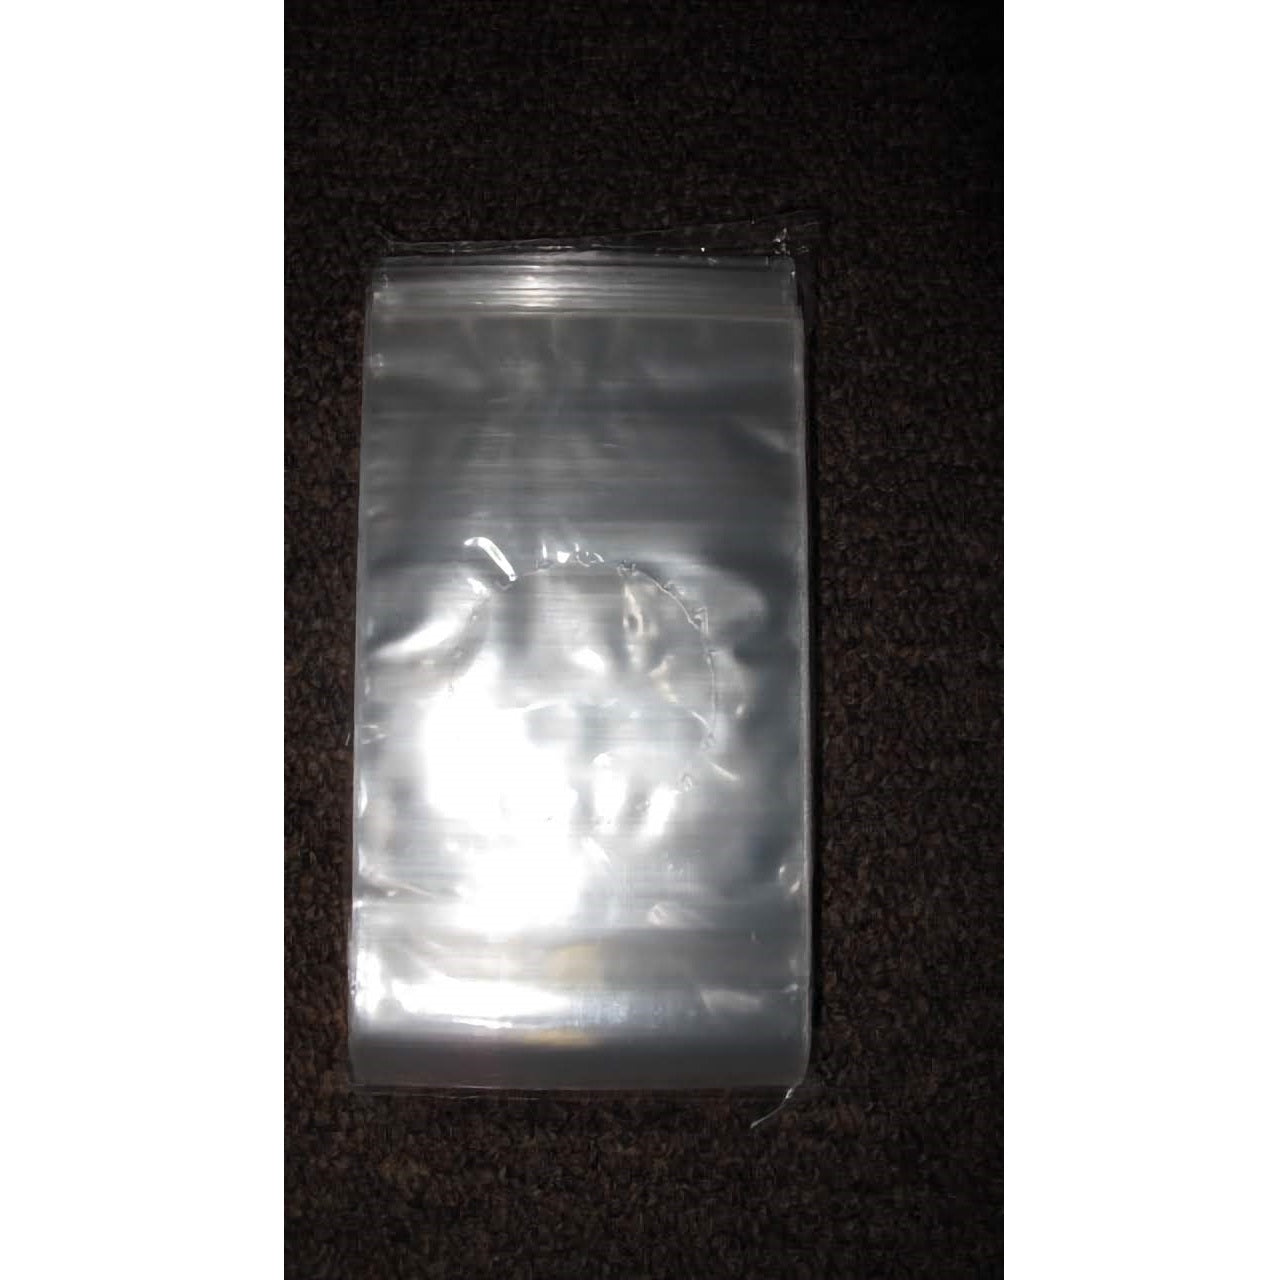 A stack of clear cellophane bags sized for suckers. These bags appear to be about 3 x 5 inches, suitable for individual sweets or small treats.